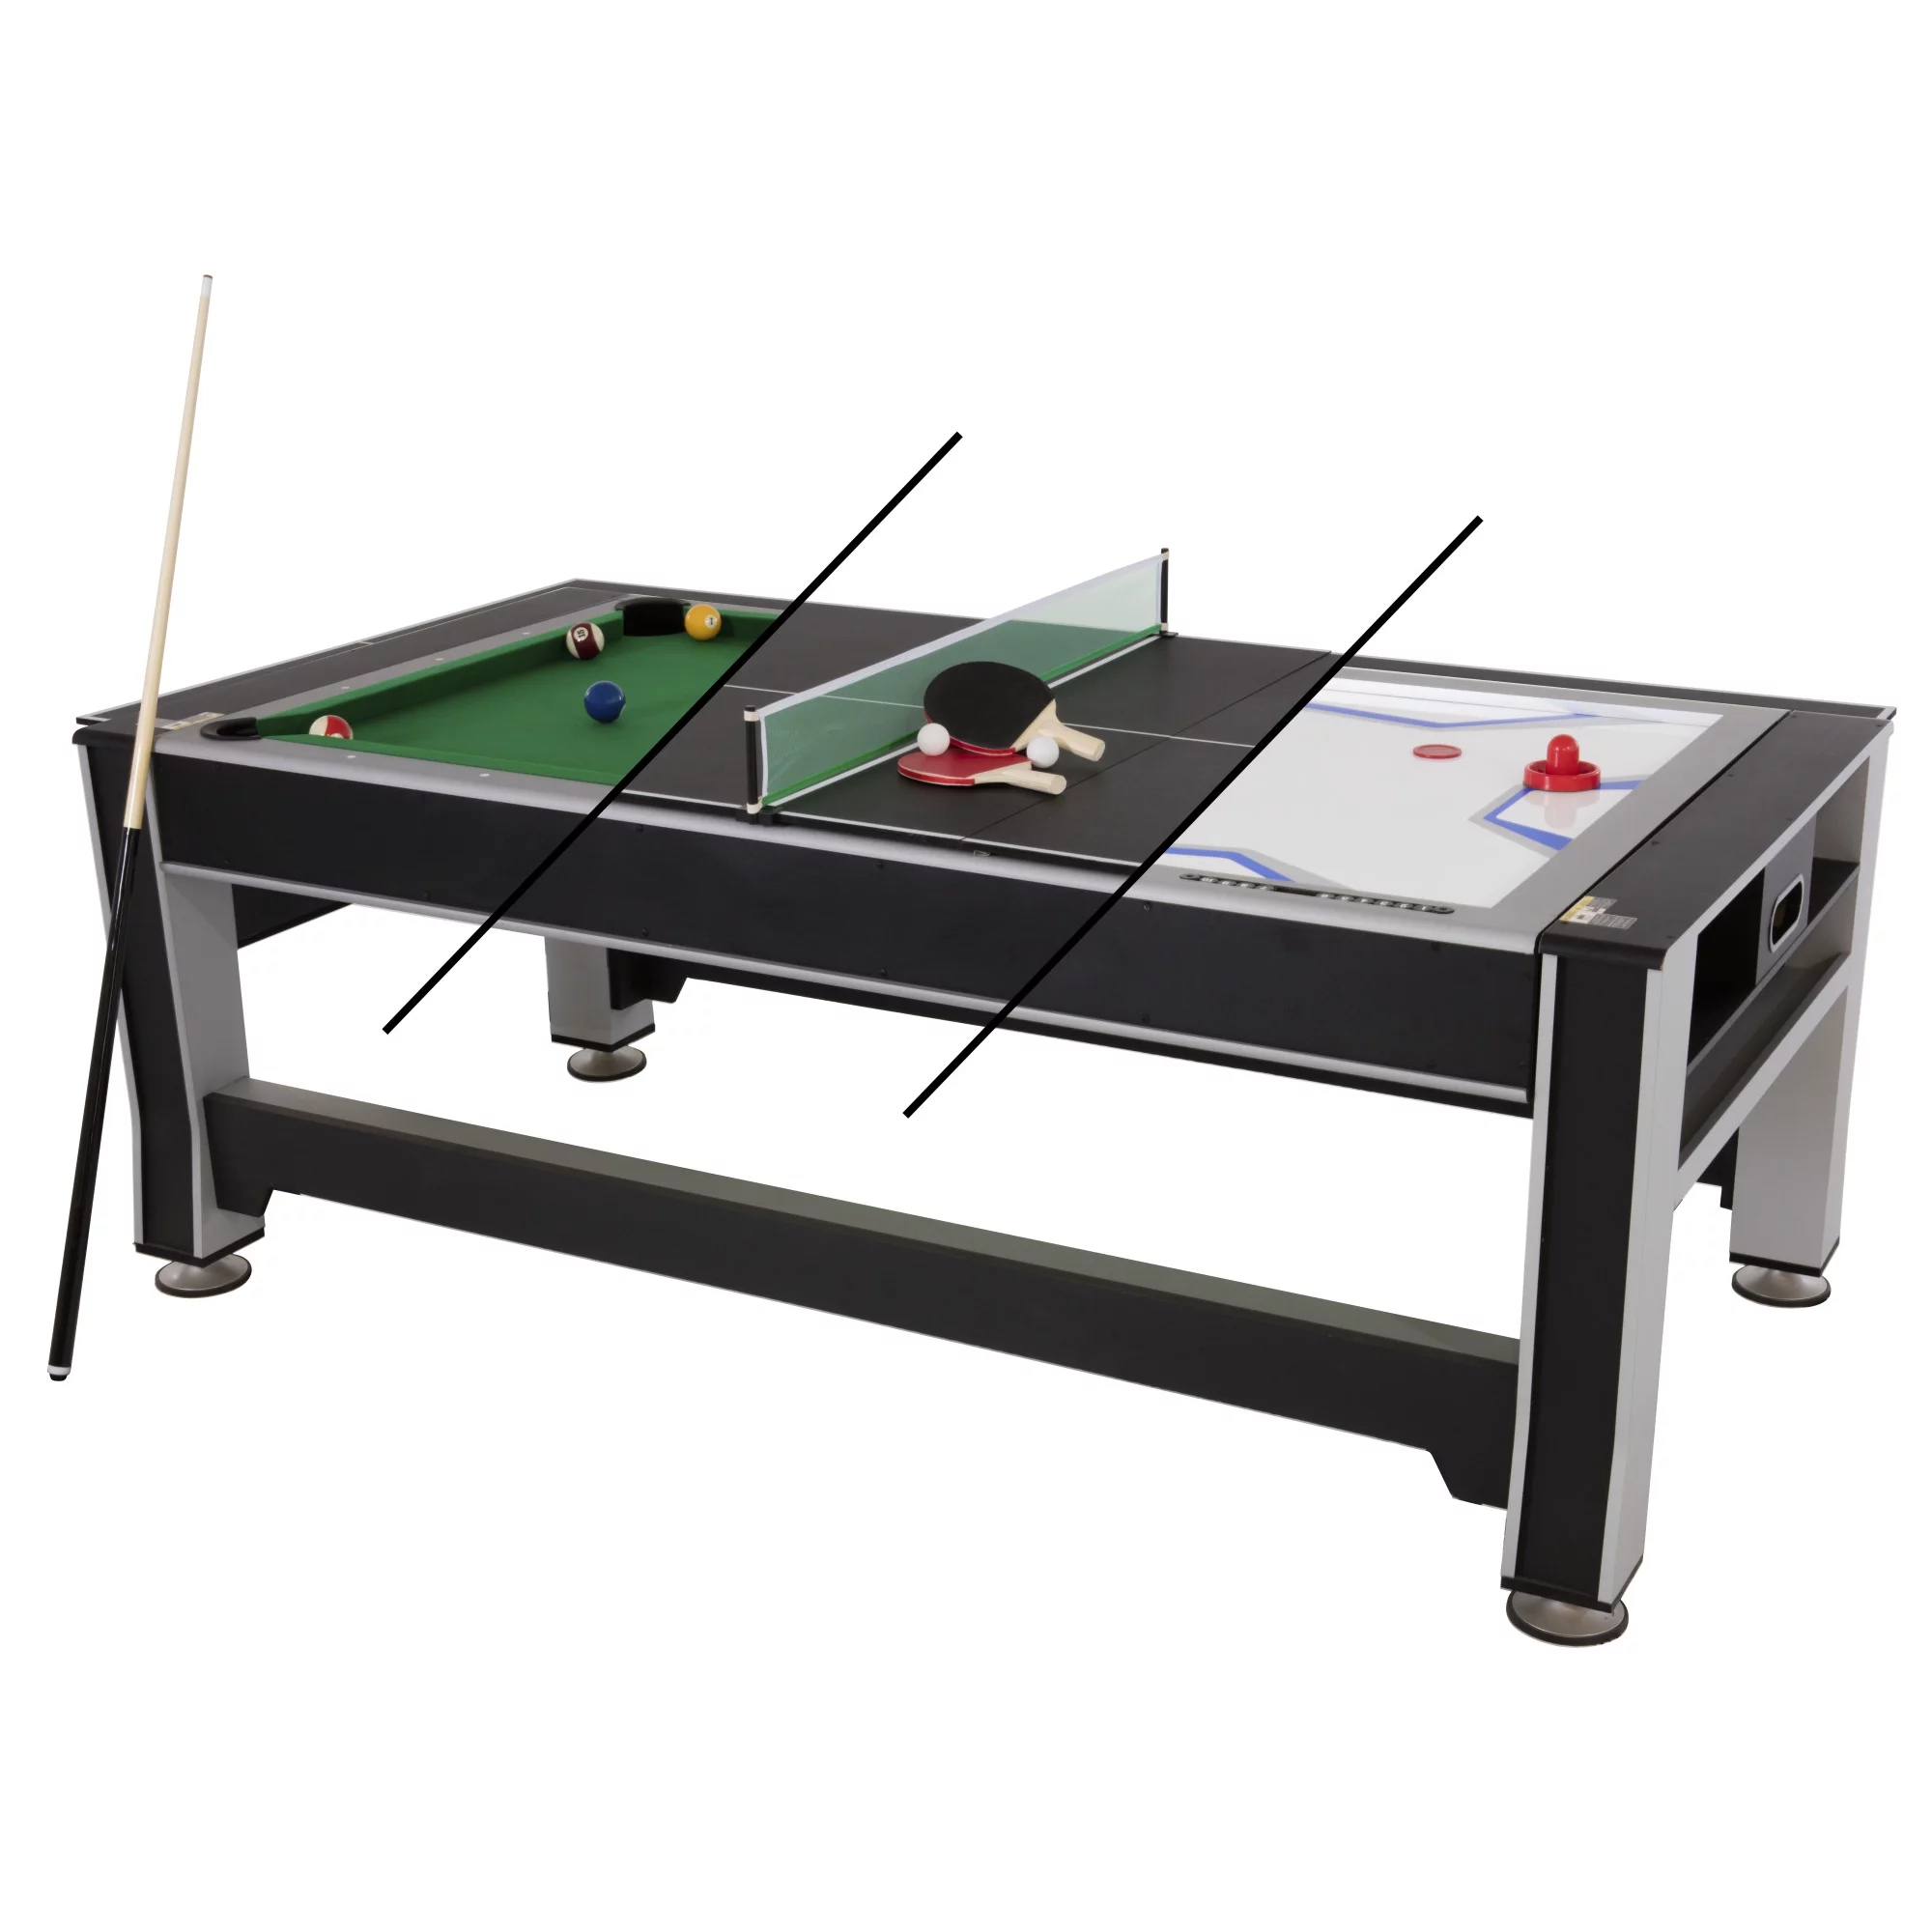 Triumph 3-in-1 multigame pool, air hockey, and table tennis game table